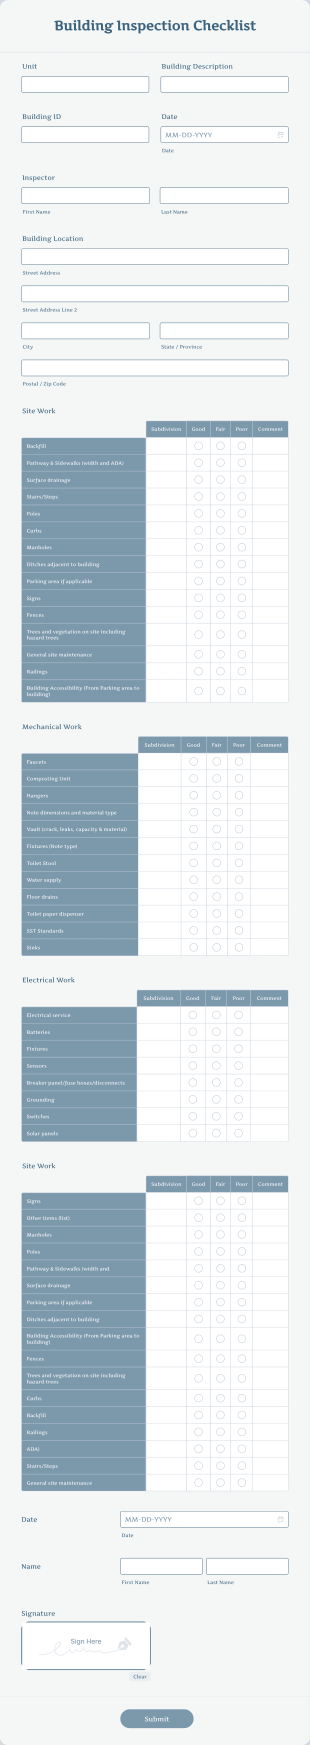 Building Inspection Checklist Form Template